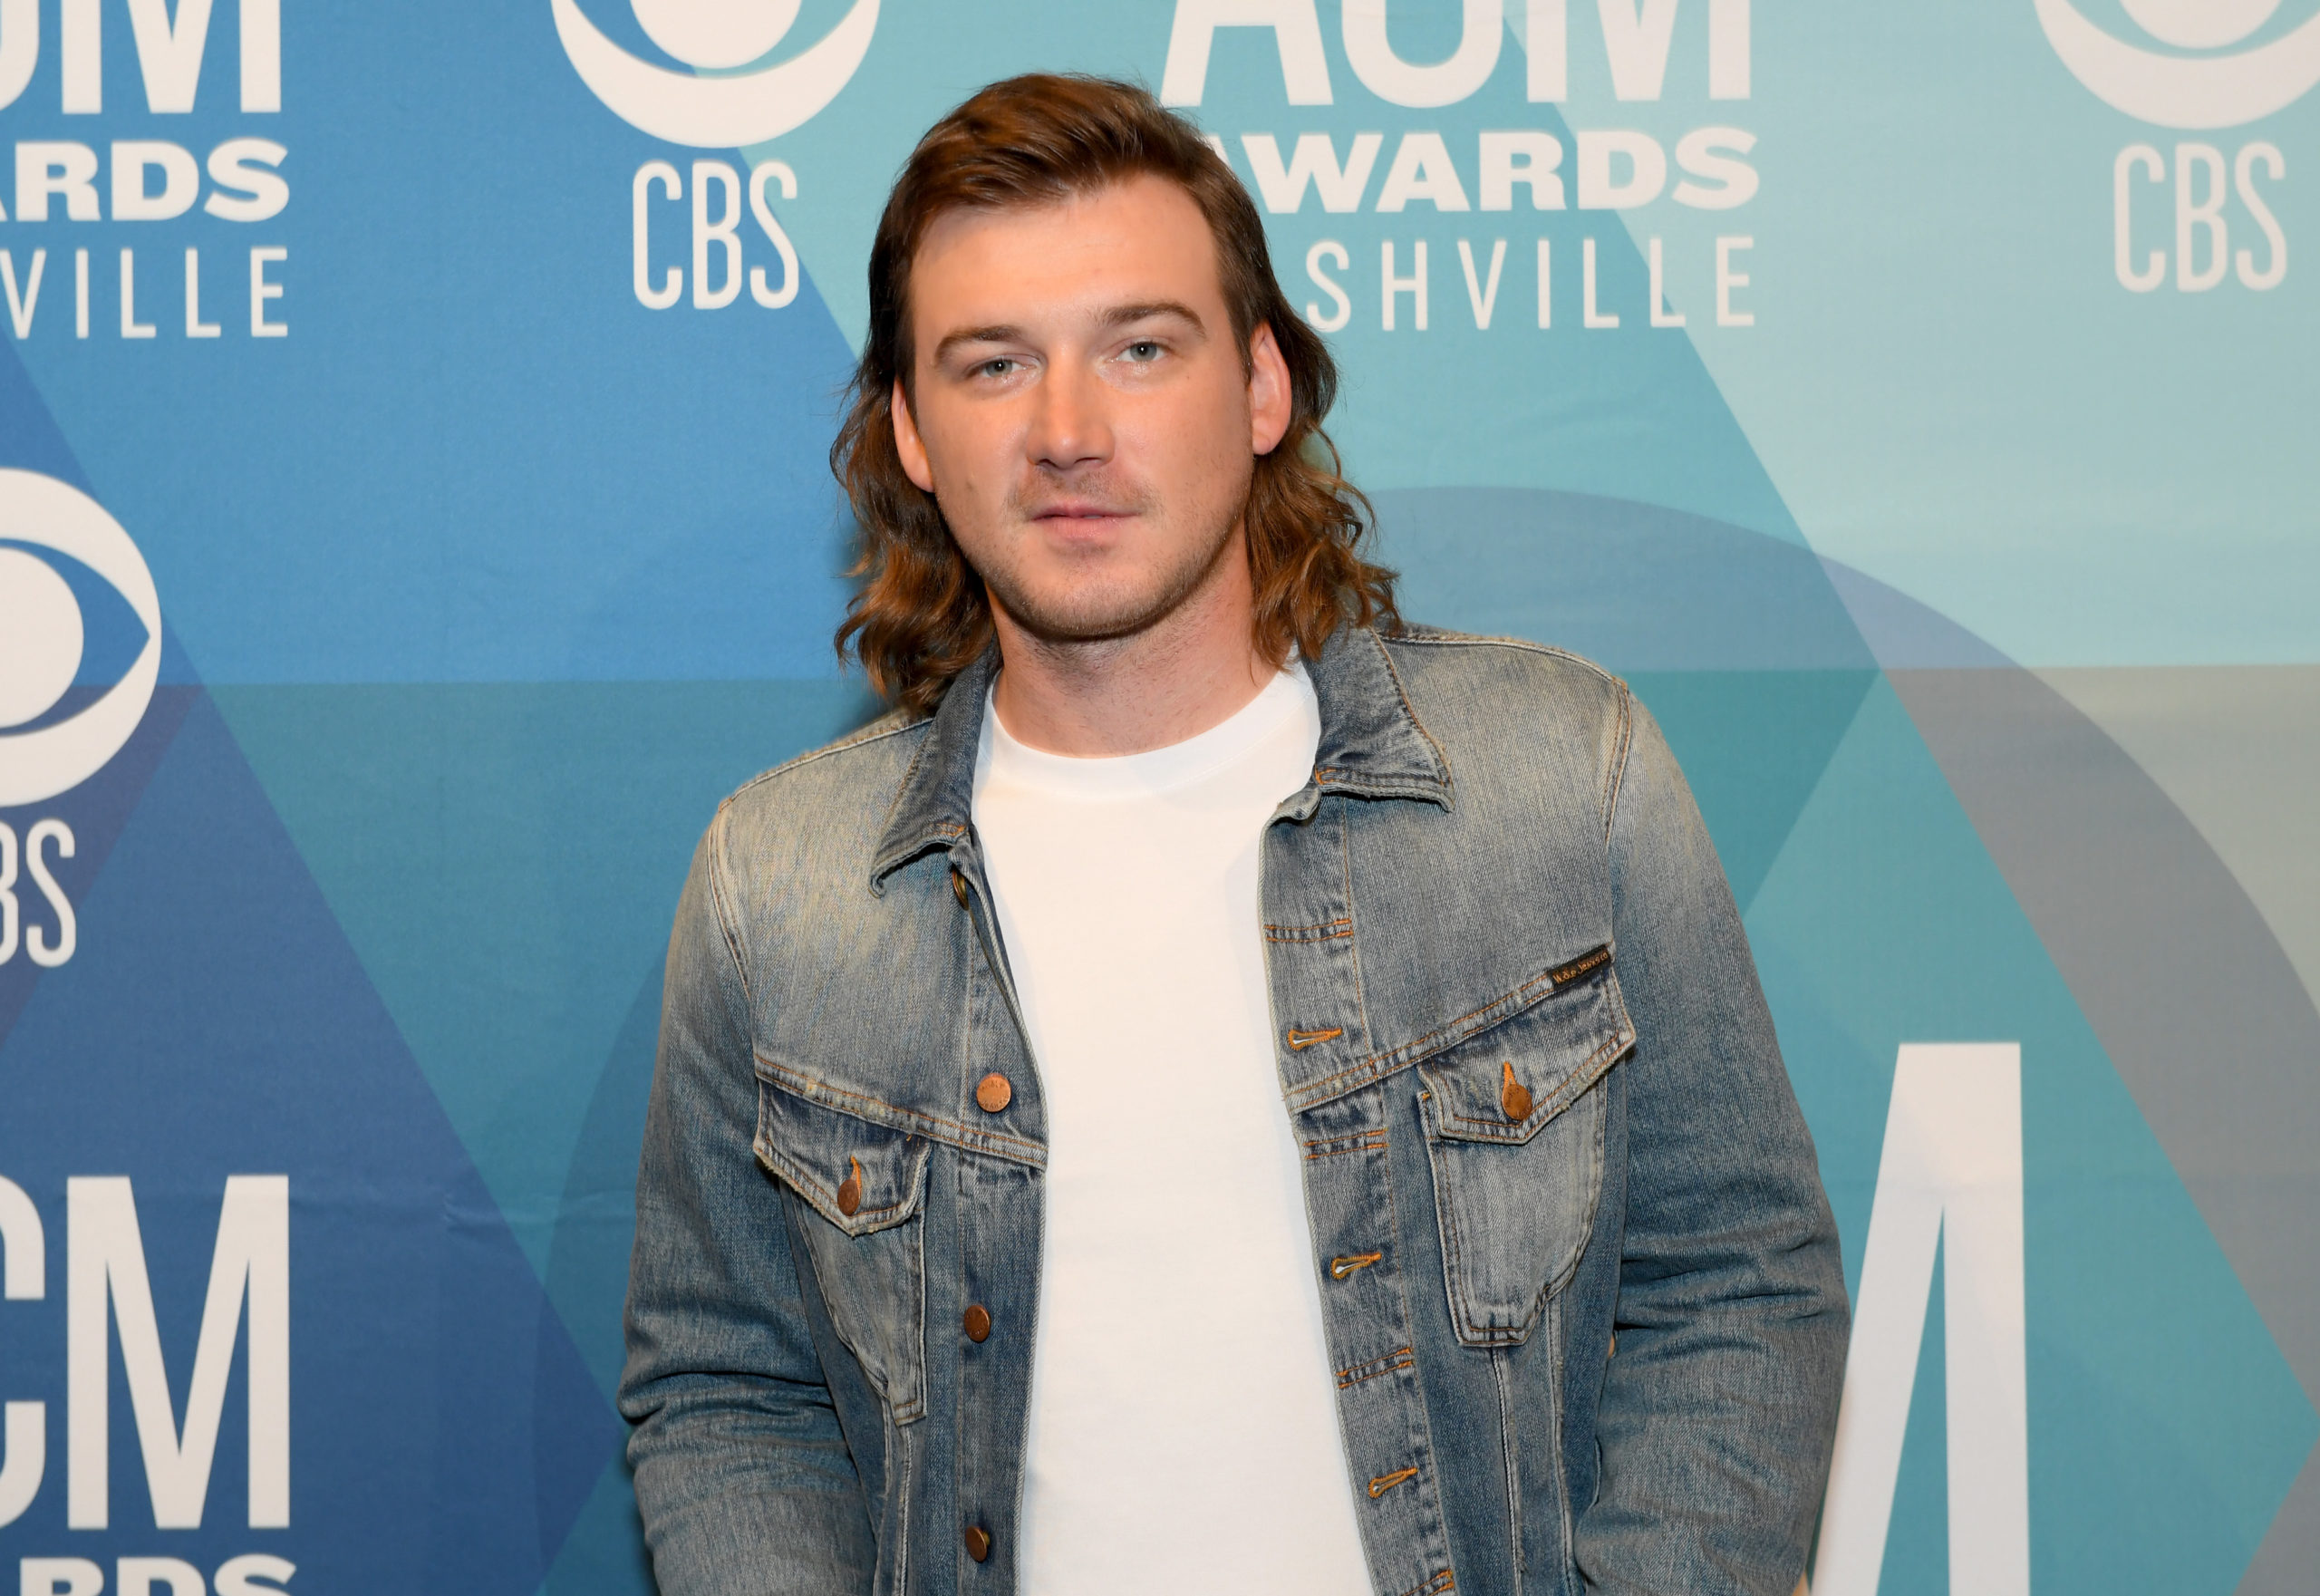 Country Singer Wallen Went 'Silent' and Bailed on NAACP Meeting